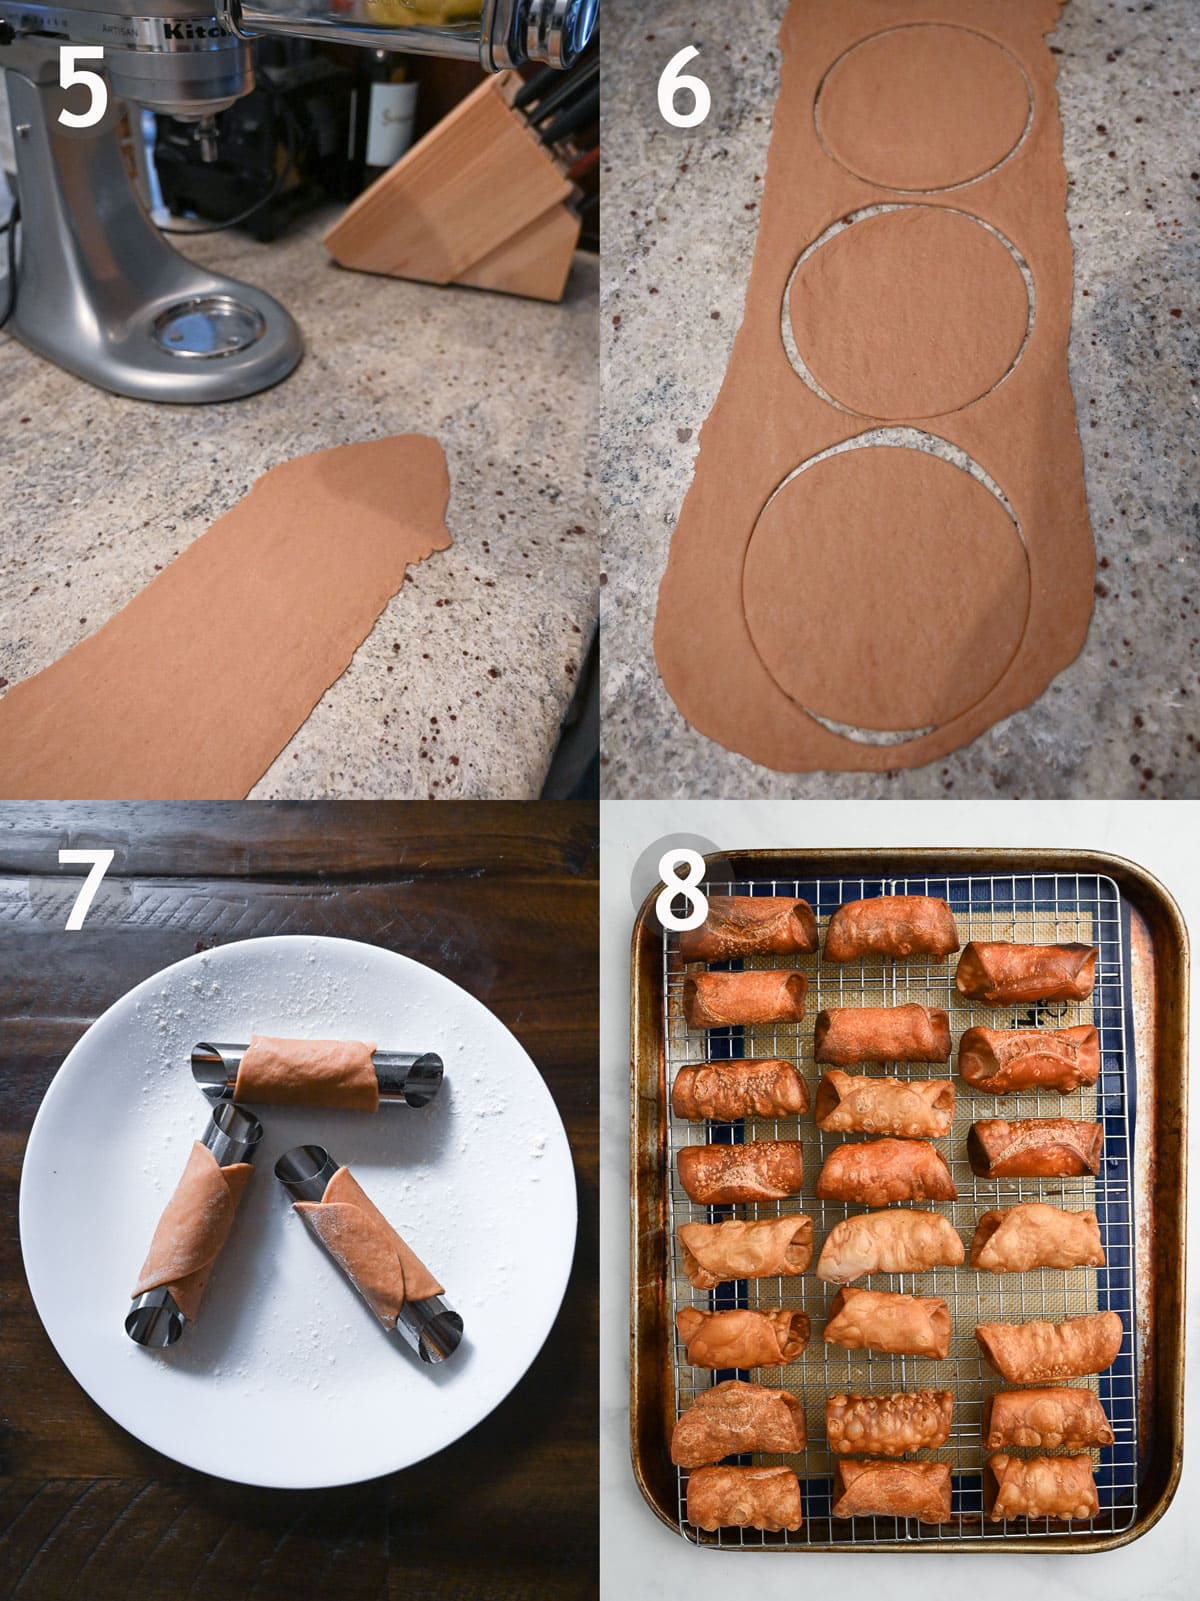 Cannoli shell, steps-5-8 Including rolling out, cutting and frying dough.